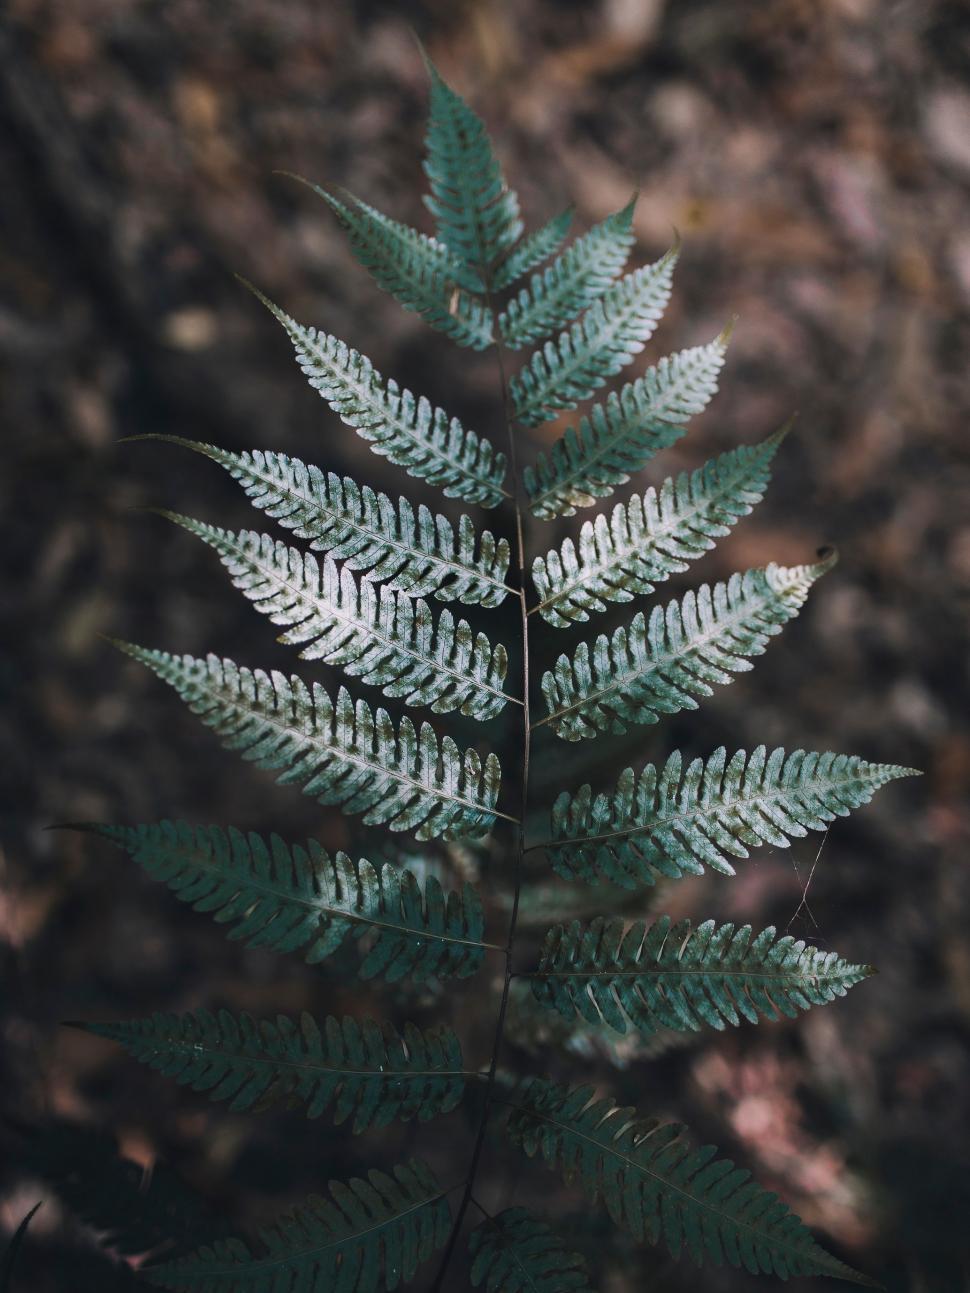 Free Image of Close Up of a Leaf on a Plant 